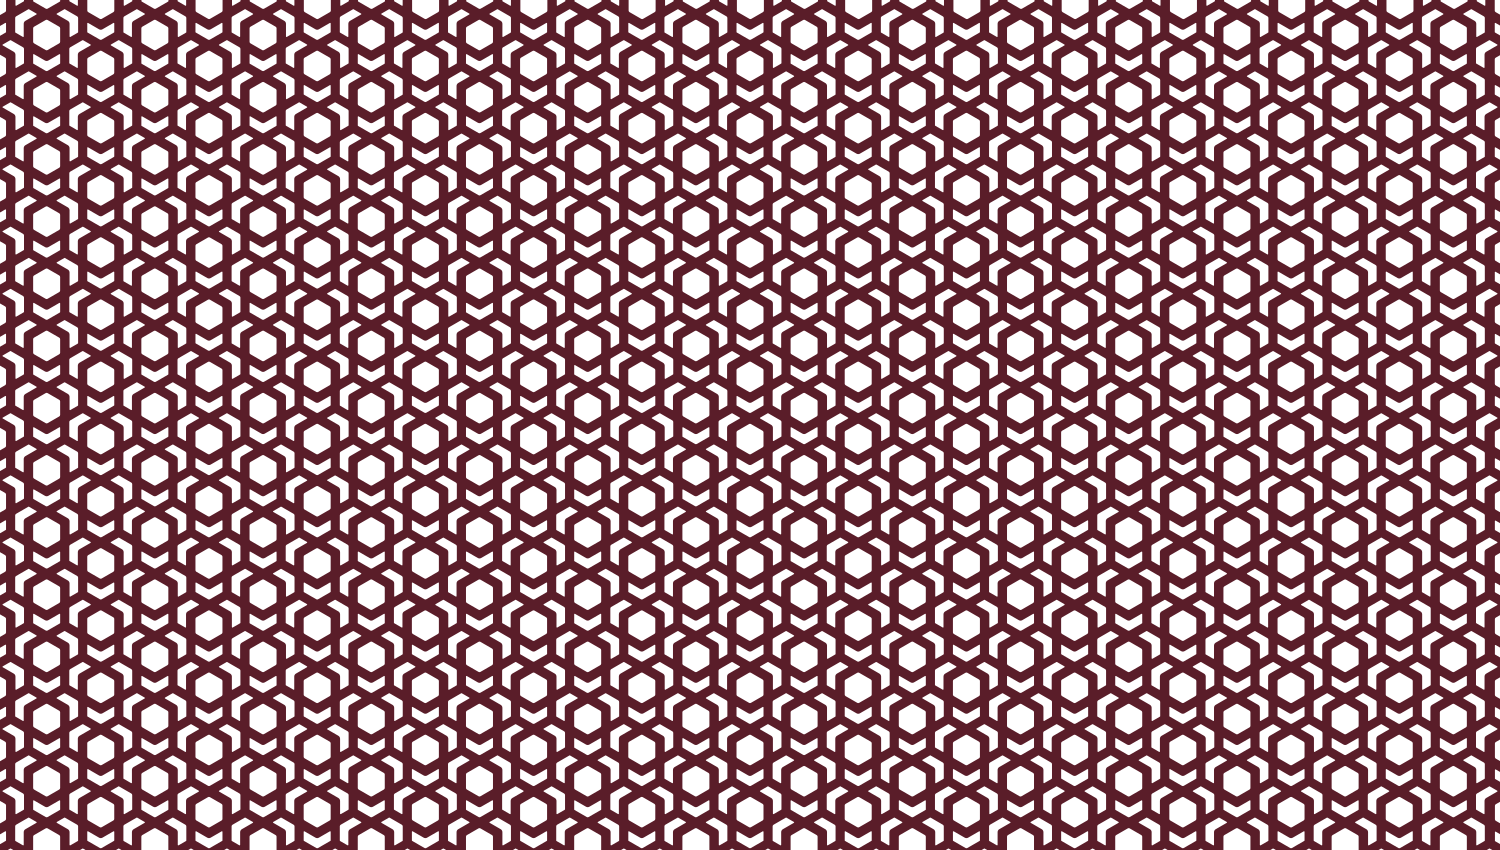 Parasoleil™ Damascus© pattern displayed with a burgundy color overlay